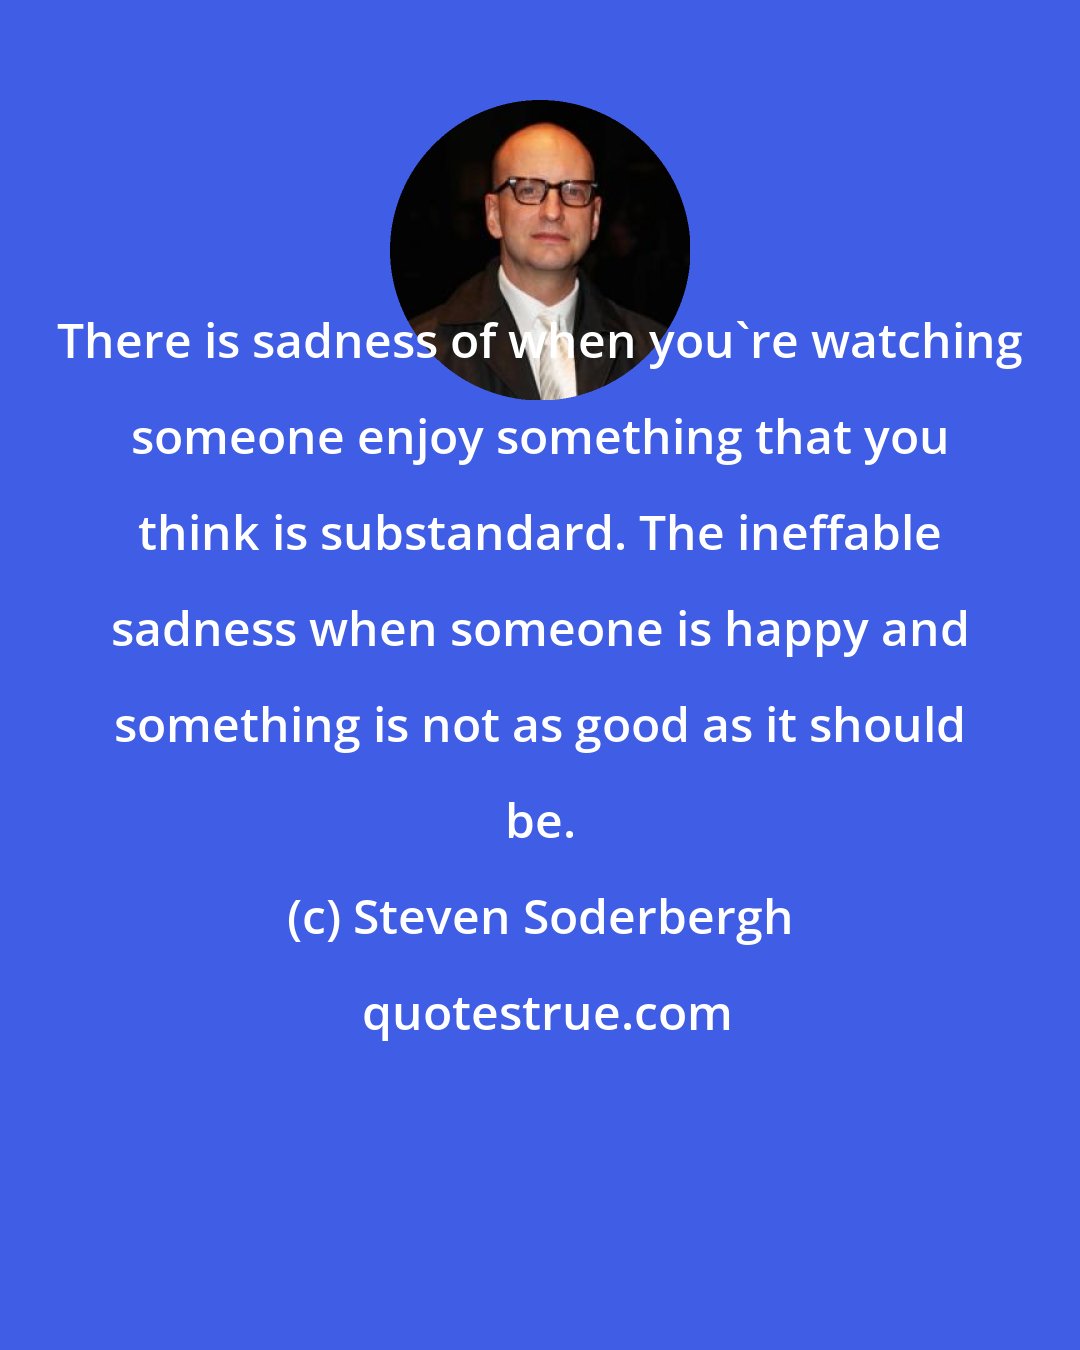 Steven Soderbergh: There is sadness of when you're watching someone enjoy something that you think is substandard. The ineffable sadness when someone is happy and something is not as good as it should be.